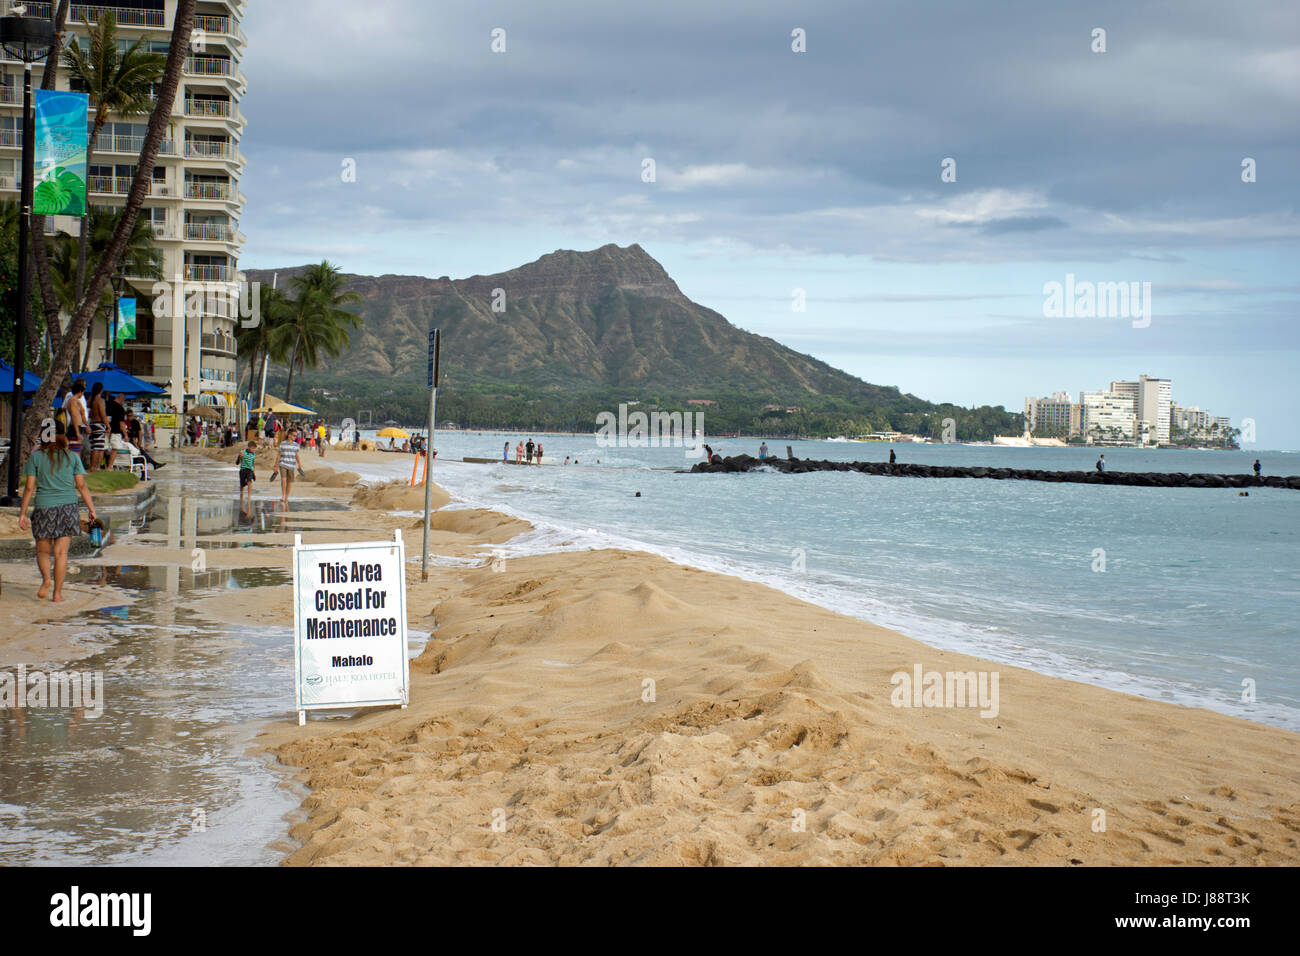 Record high tides or king tides in Waikiki Beach in May 2017, Oahu, Hawaii Stock Photo